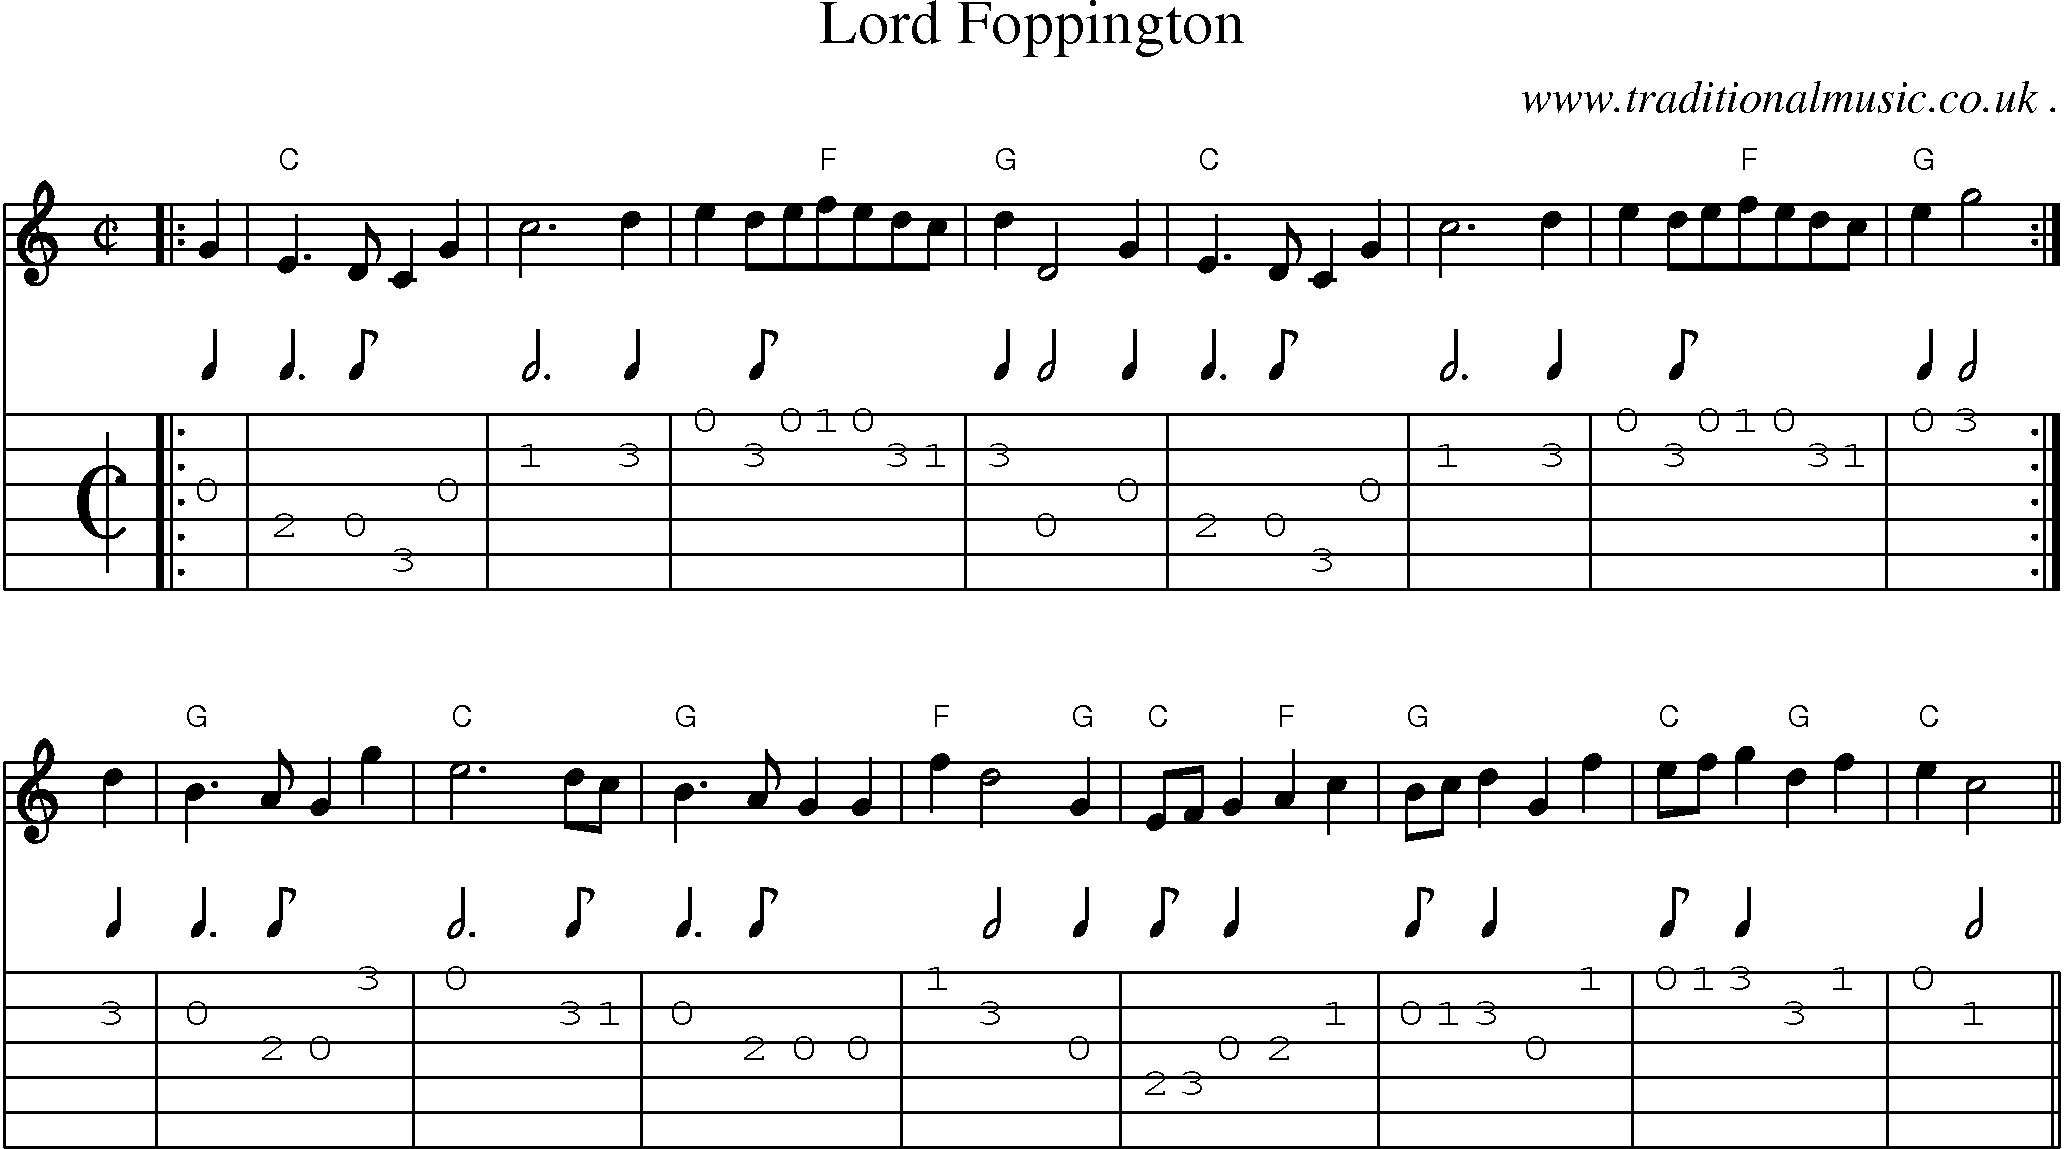 Sheet-Music and Guitar Tabs for Lord Foppington